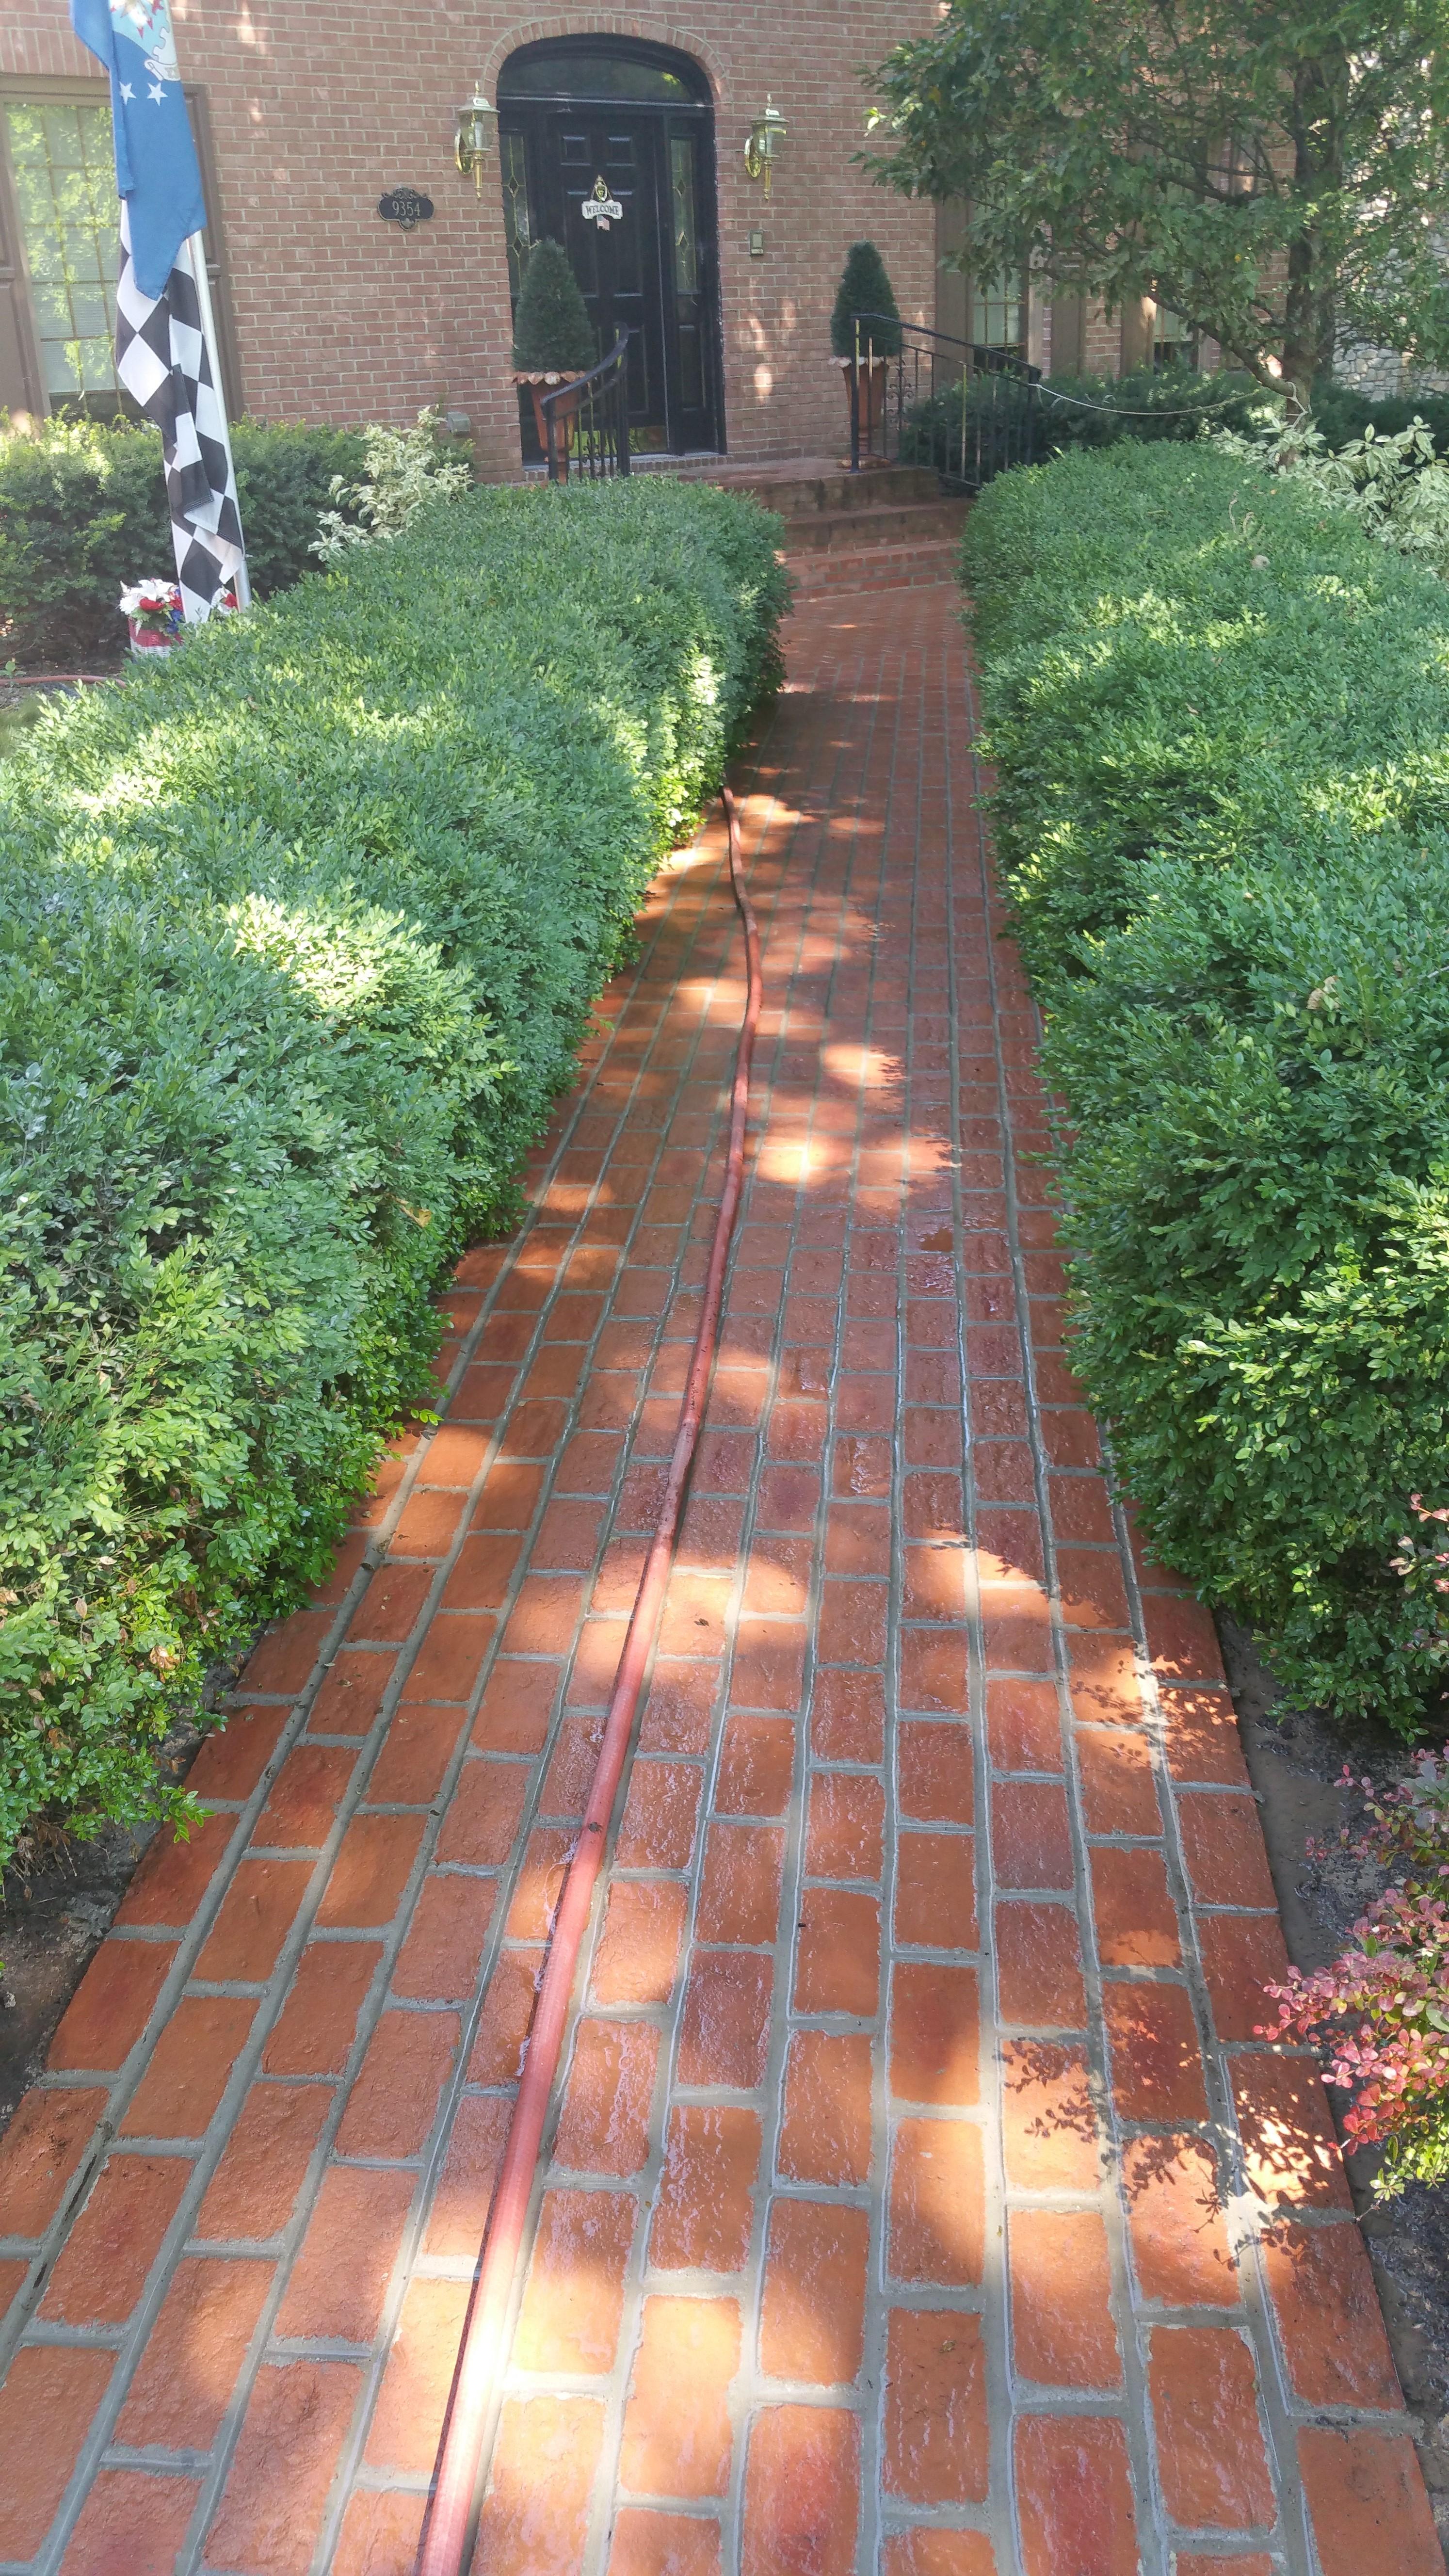 This is the same brick as the previous picture once we were done restoring it!